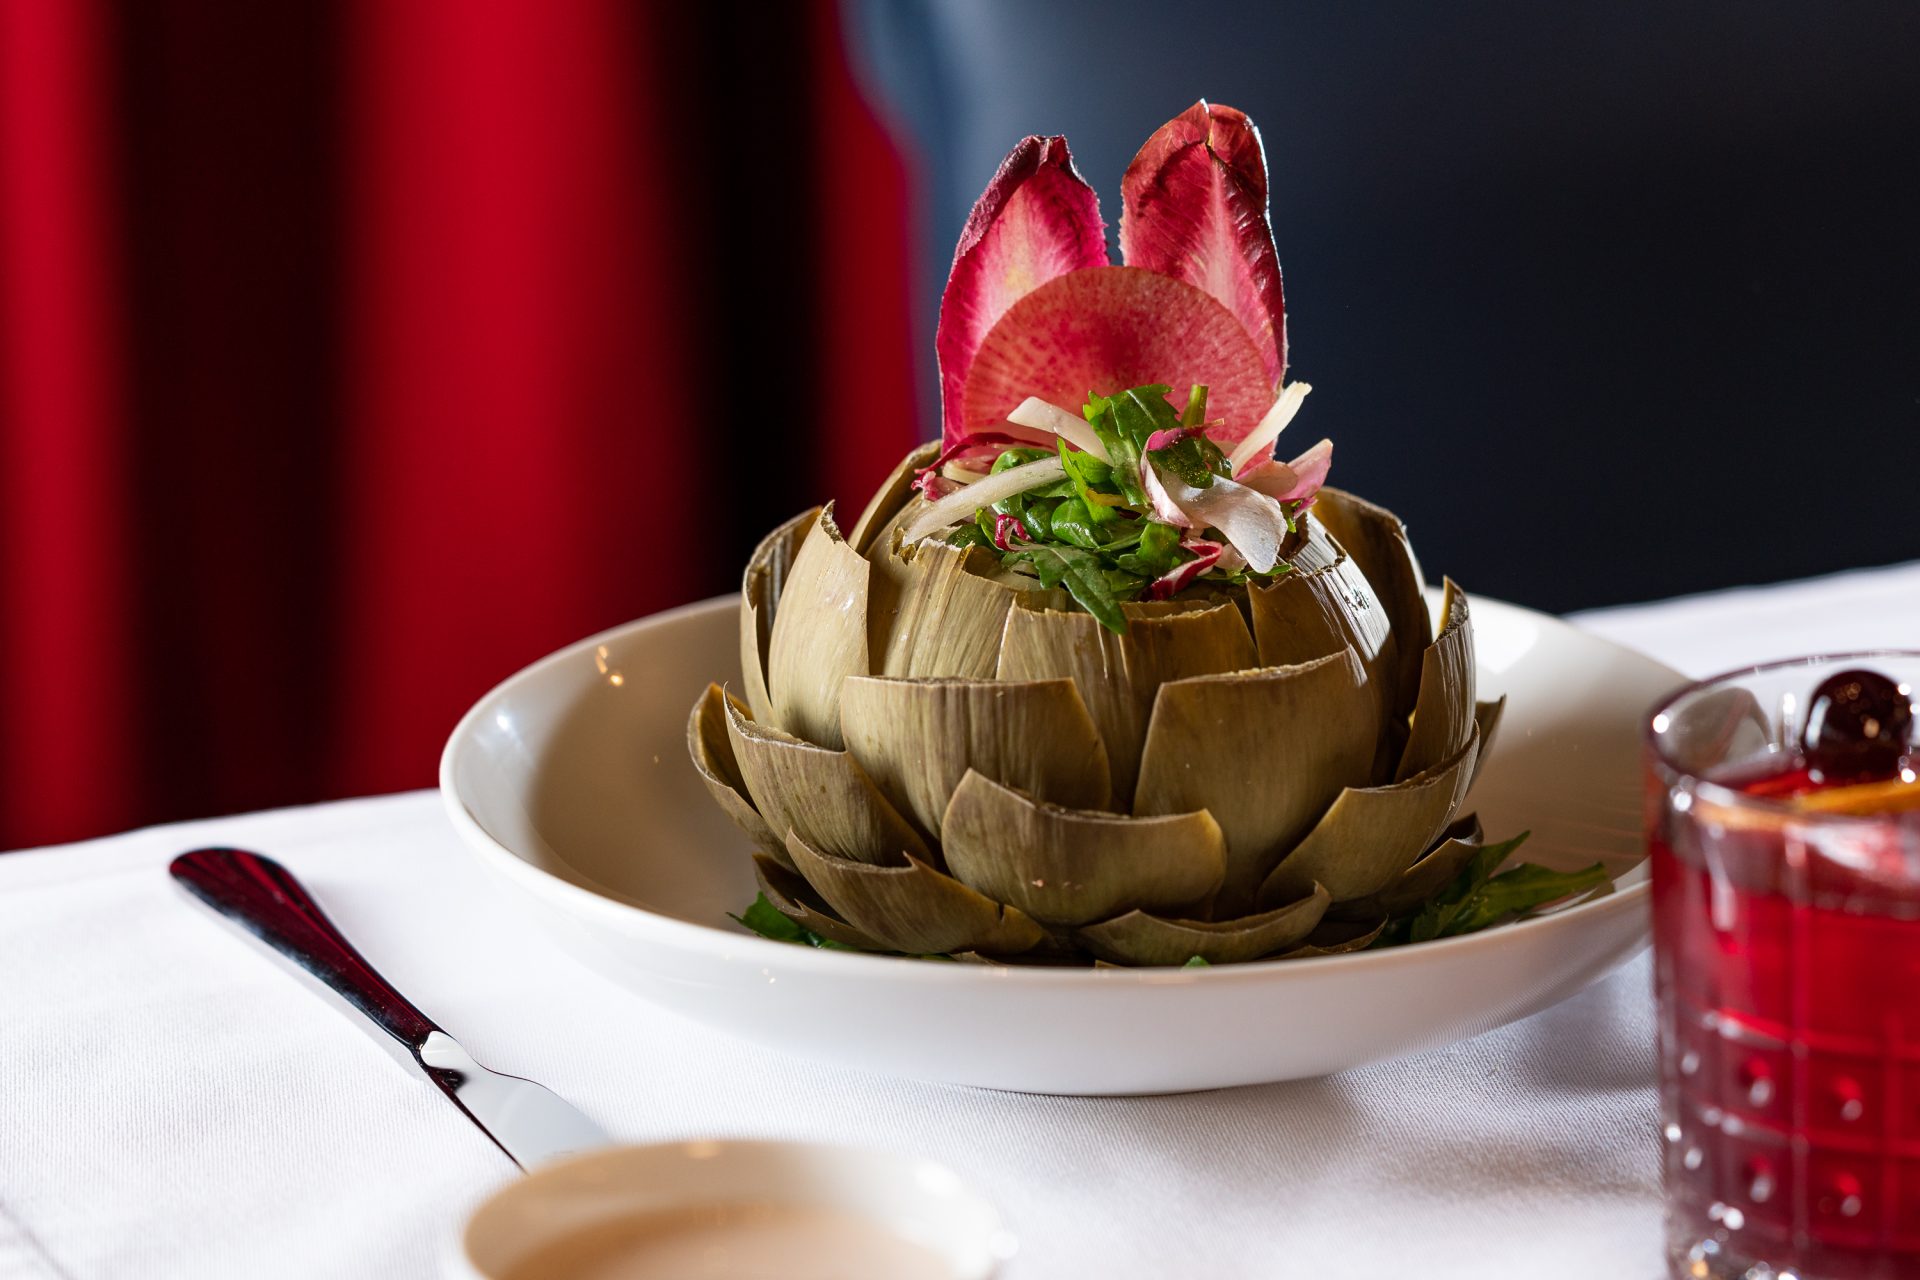 Plate of Artichoke Vinaigrette with Raoul's dressing served at Fine Dining Restaurant Riyadh - Cool Inc